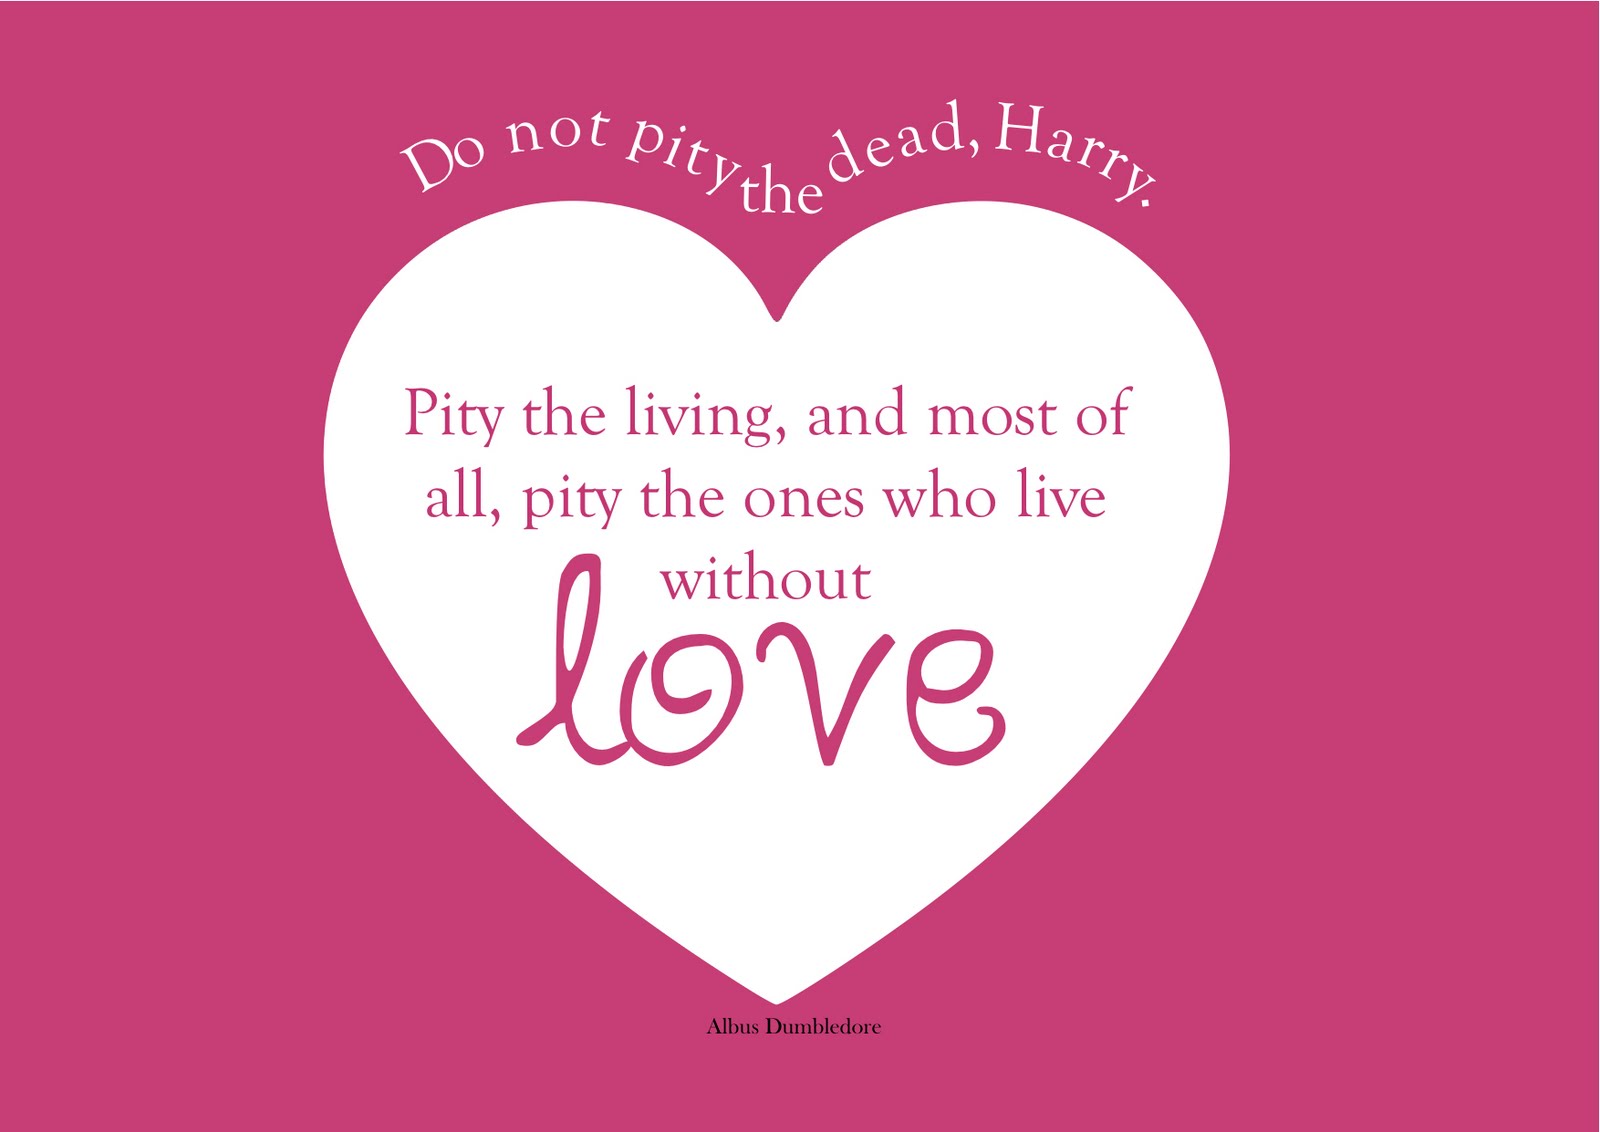 Harry Potter Quotes About Love. QuotesGram